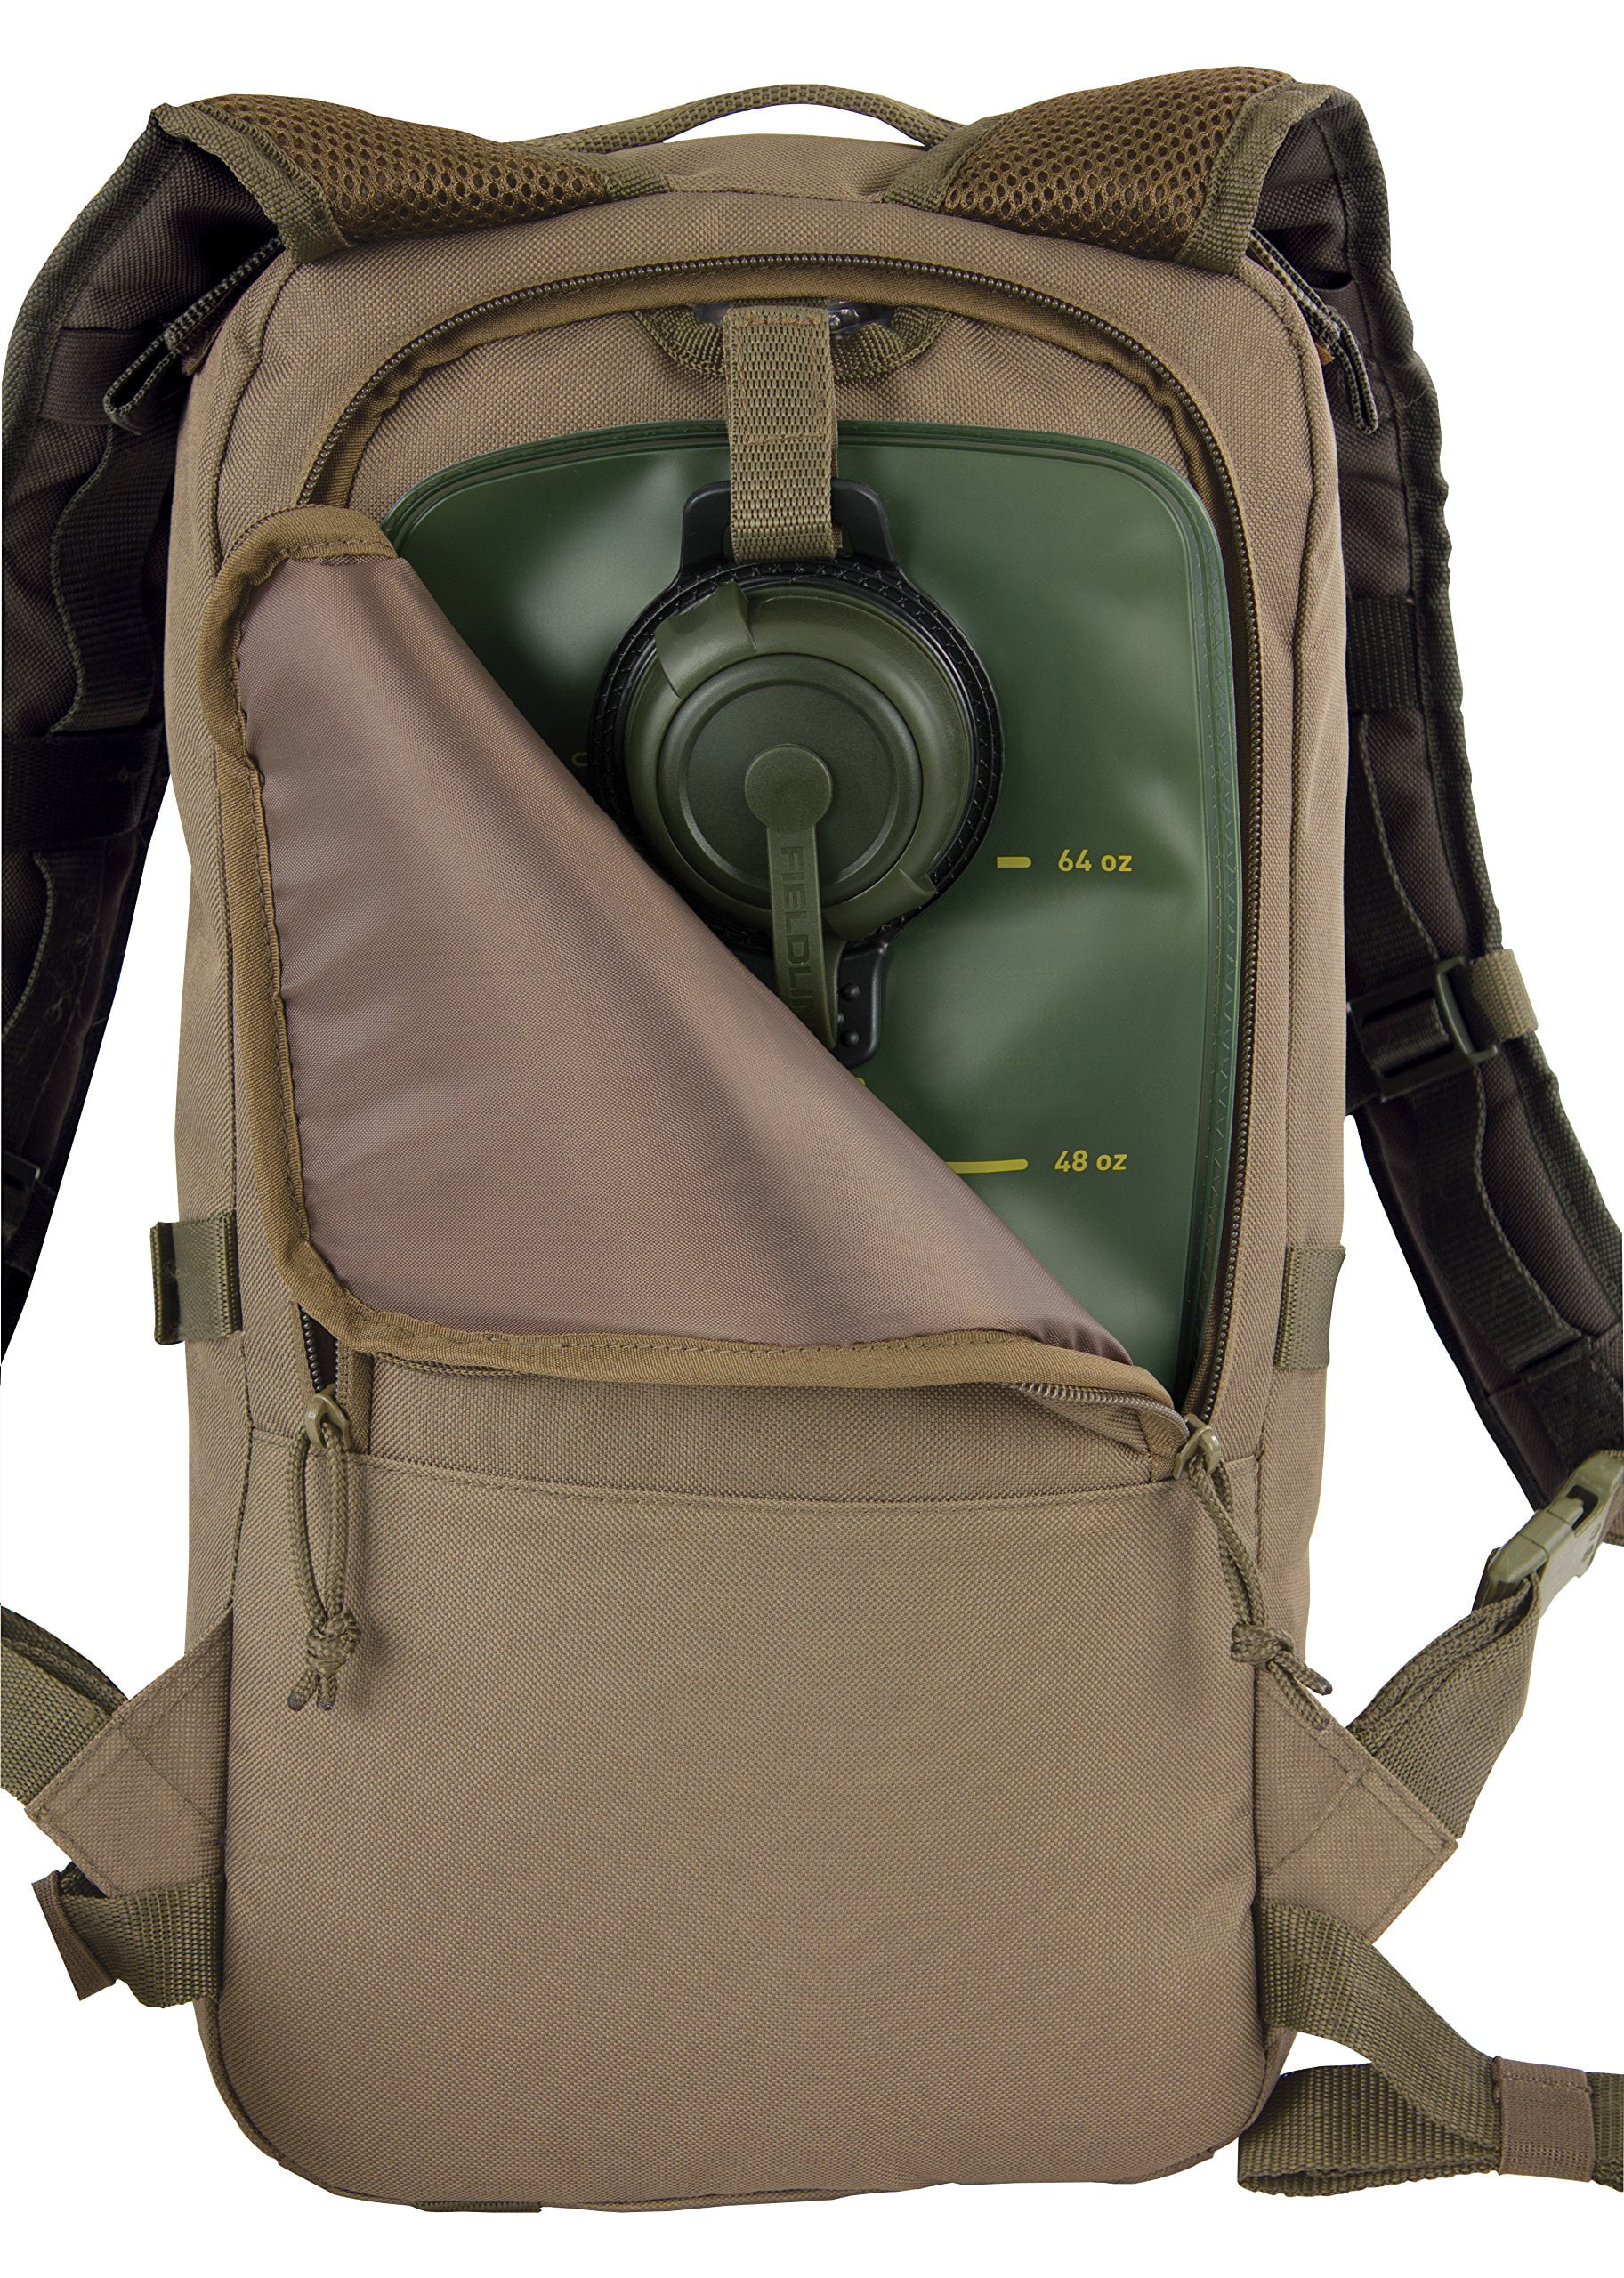 Surge Tactical Hydration Pack By Fieldline | Military Backpack With MOLLE  System | Survival Bug Out Bag | 22L Storage Capacity + 3L Reservoir  (Digital Sand) (Nazy Blazer) - Walmart.com